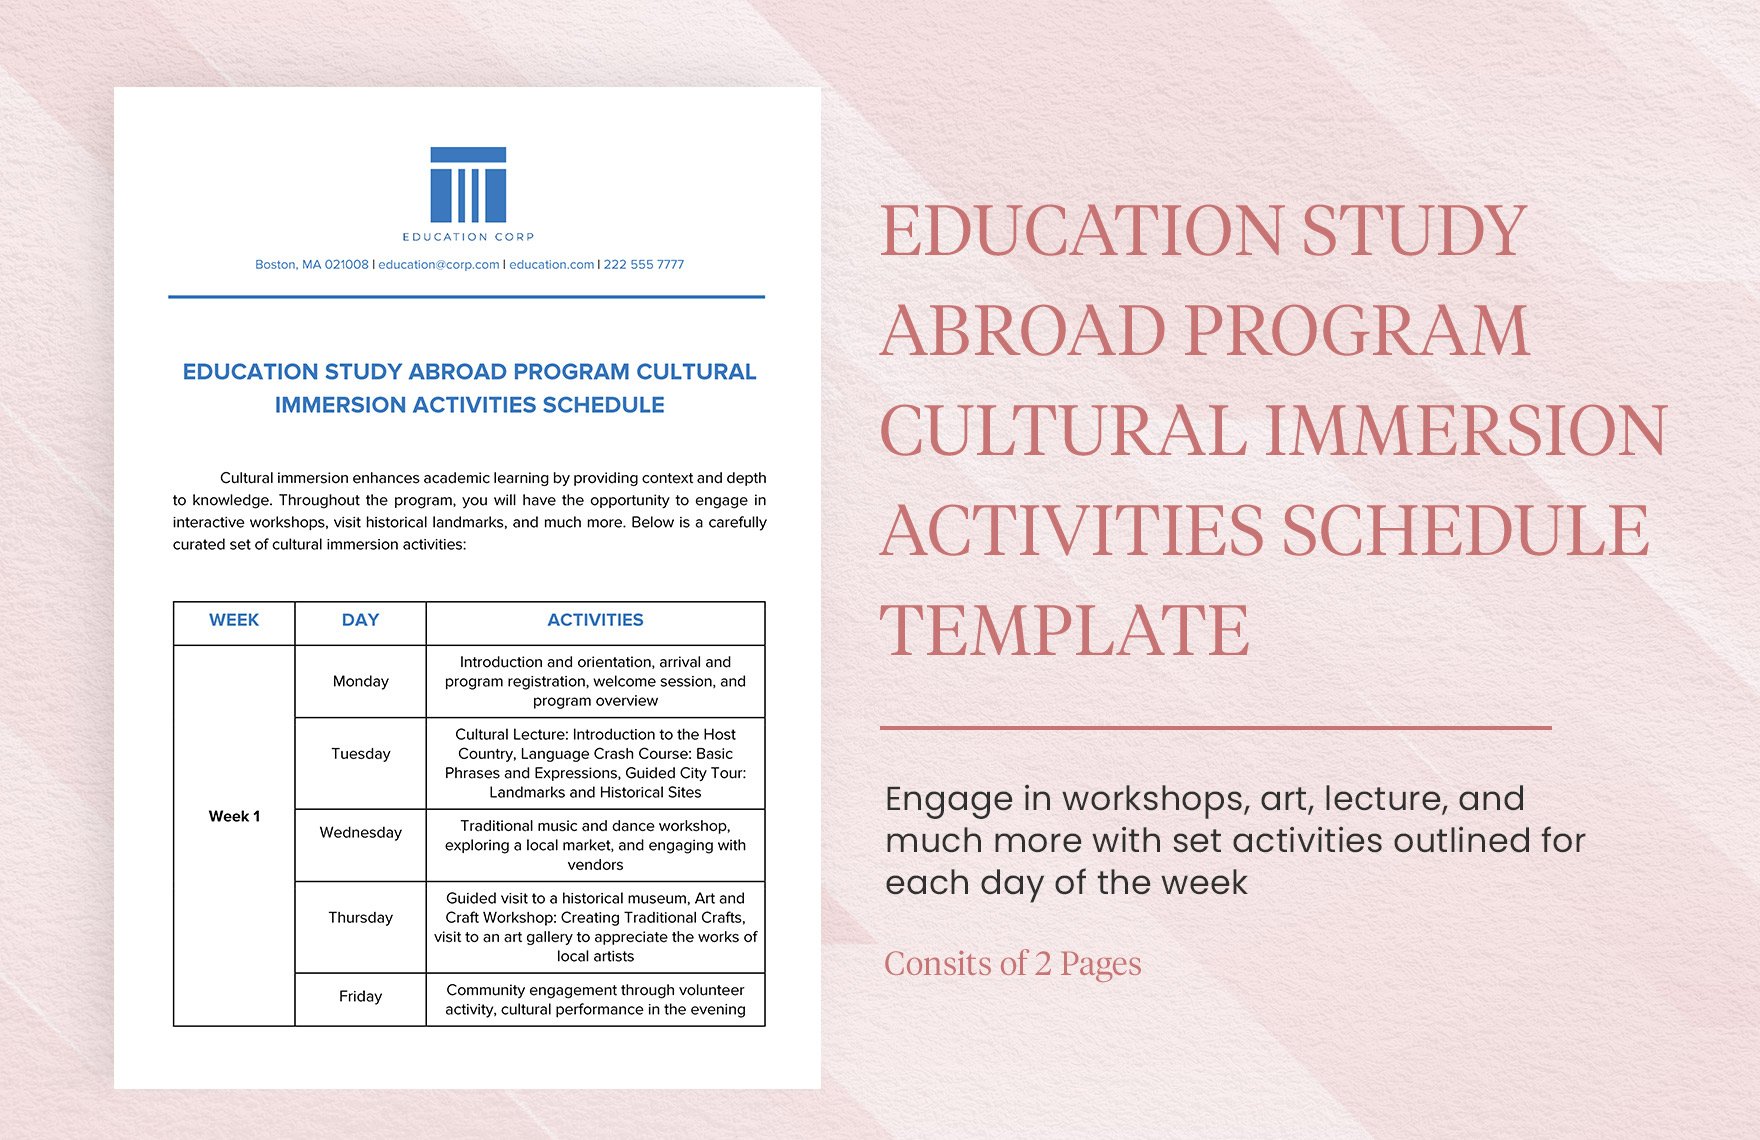 Education Study Abroad Program Cultural Immersion Activities Schedule Template